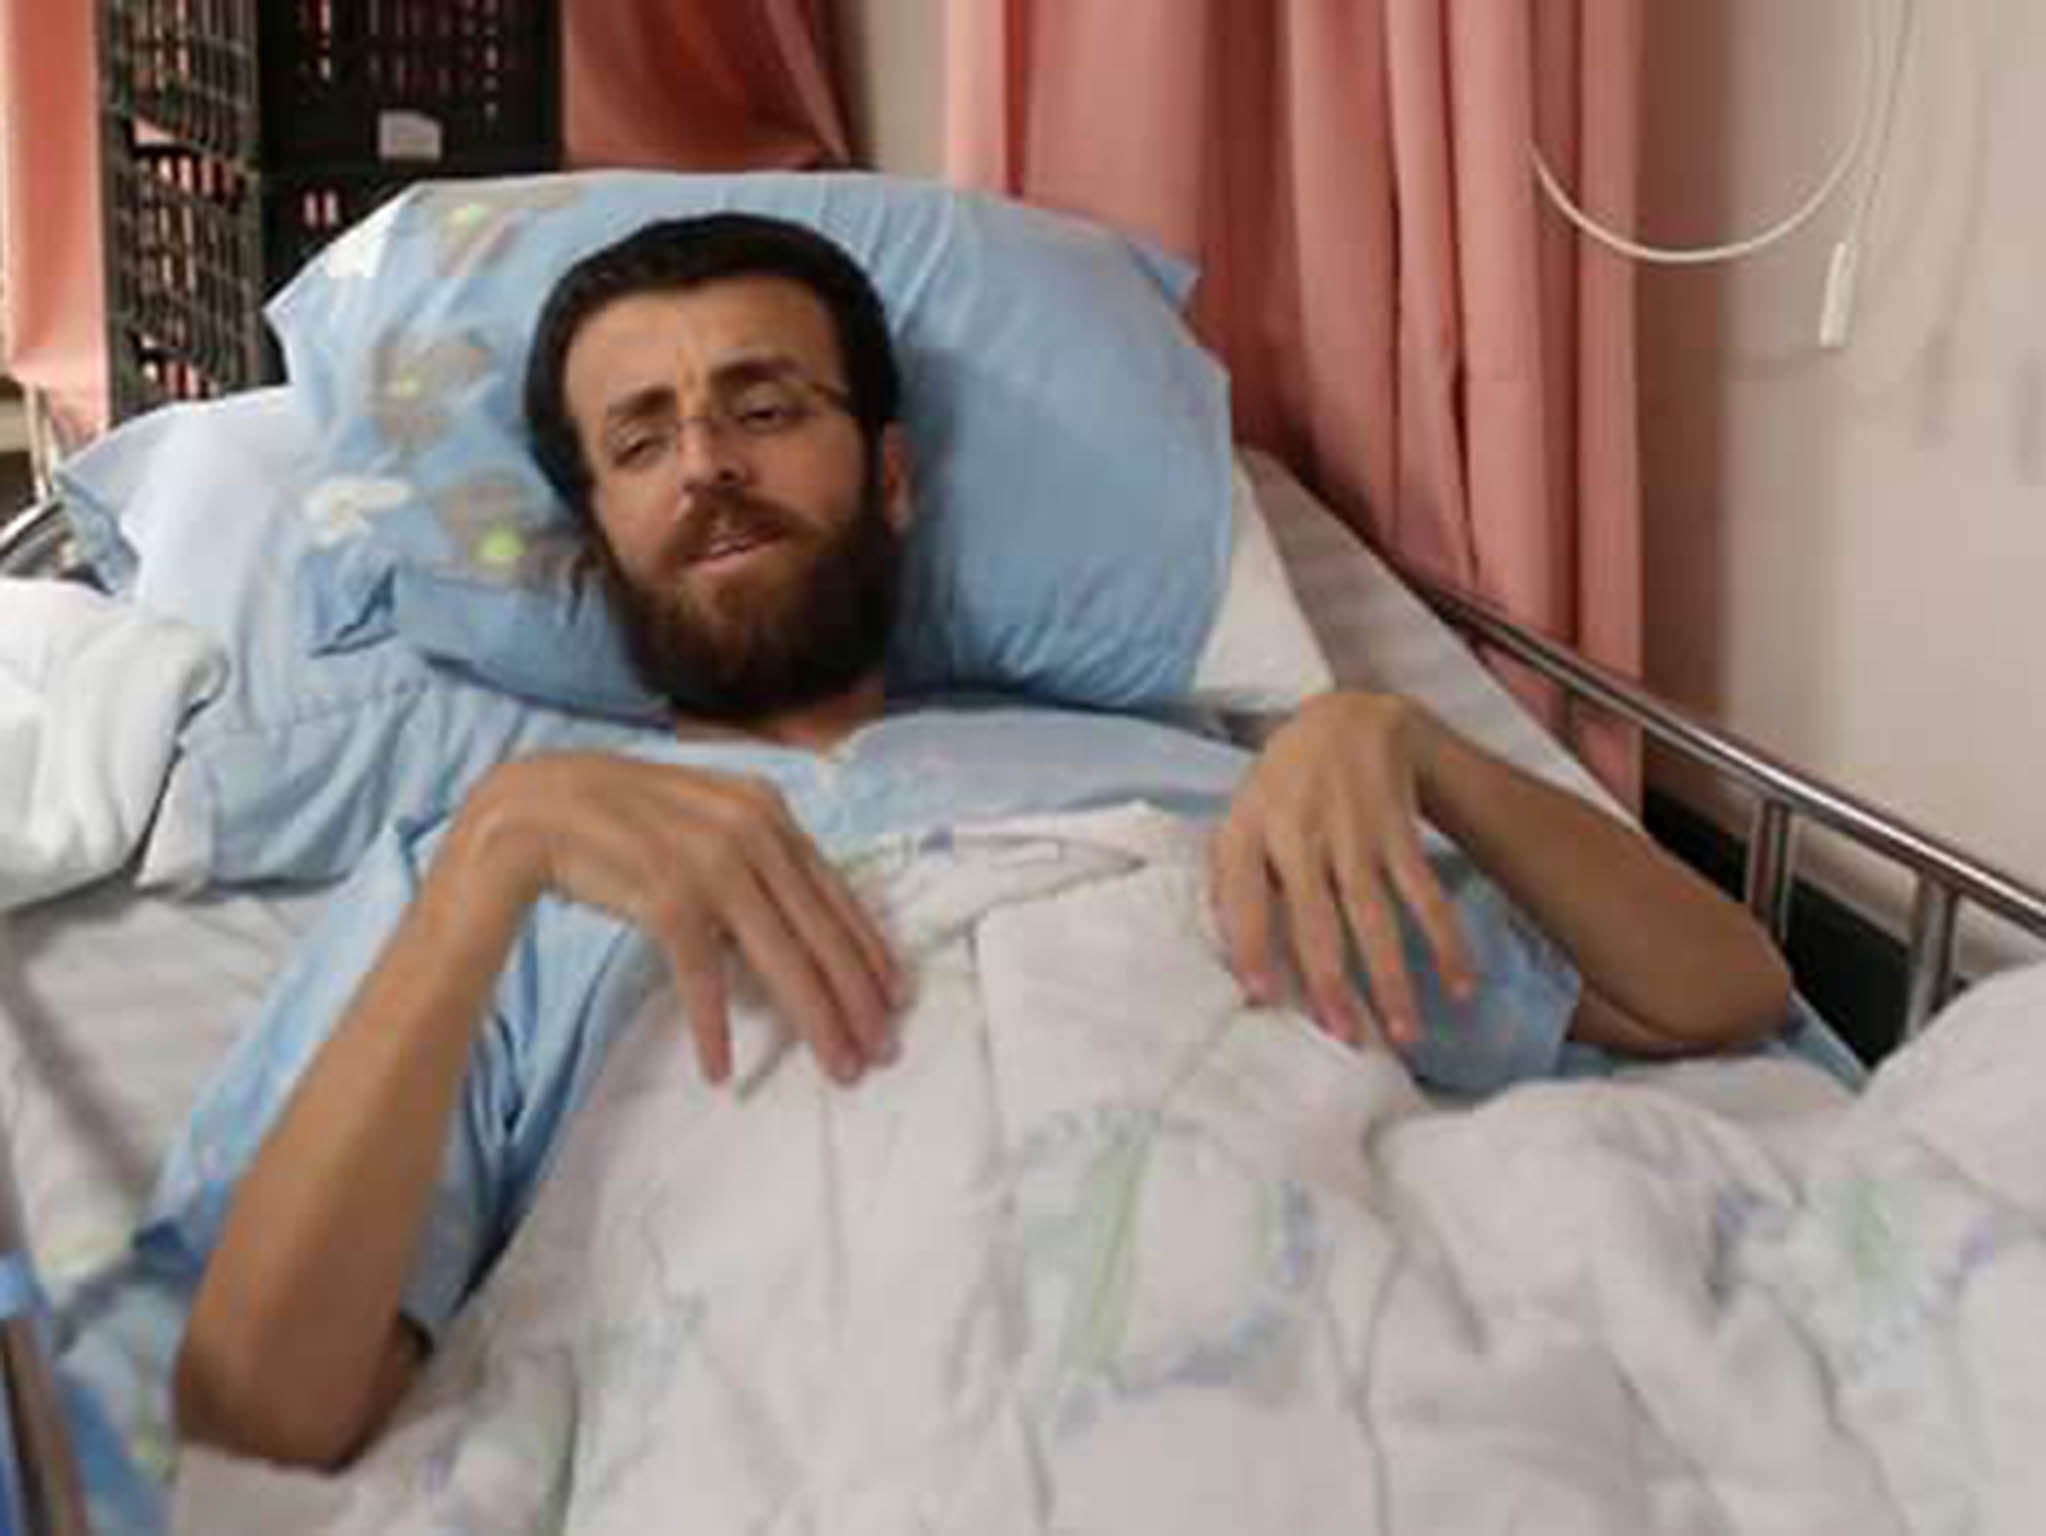 Mohammed Al-Qeeq has been on hunger strike for 77 days and has been refused a transfer from an Israeli hospital to Raallah hospital in Palestine